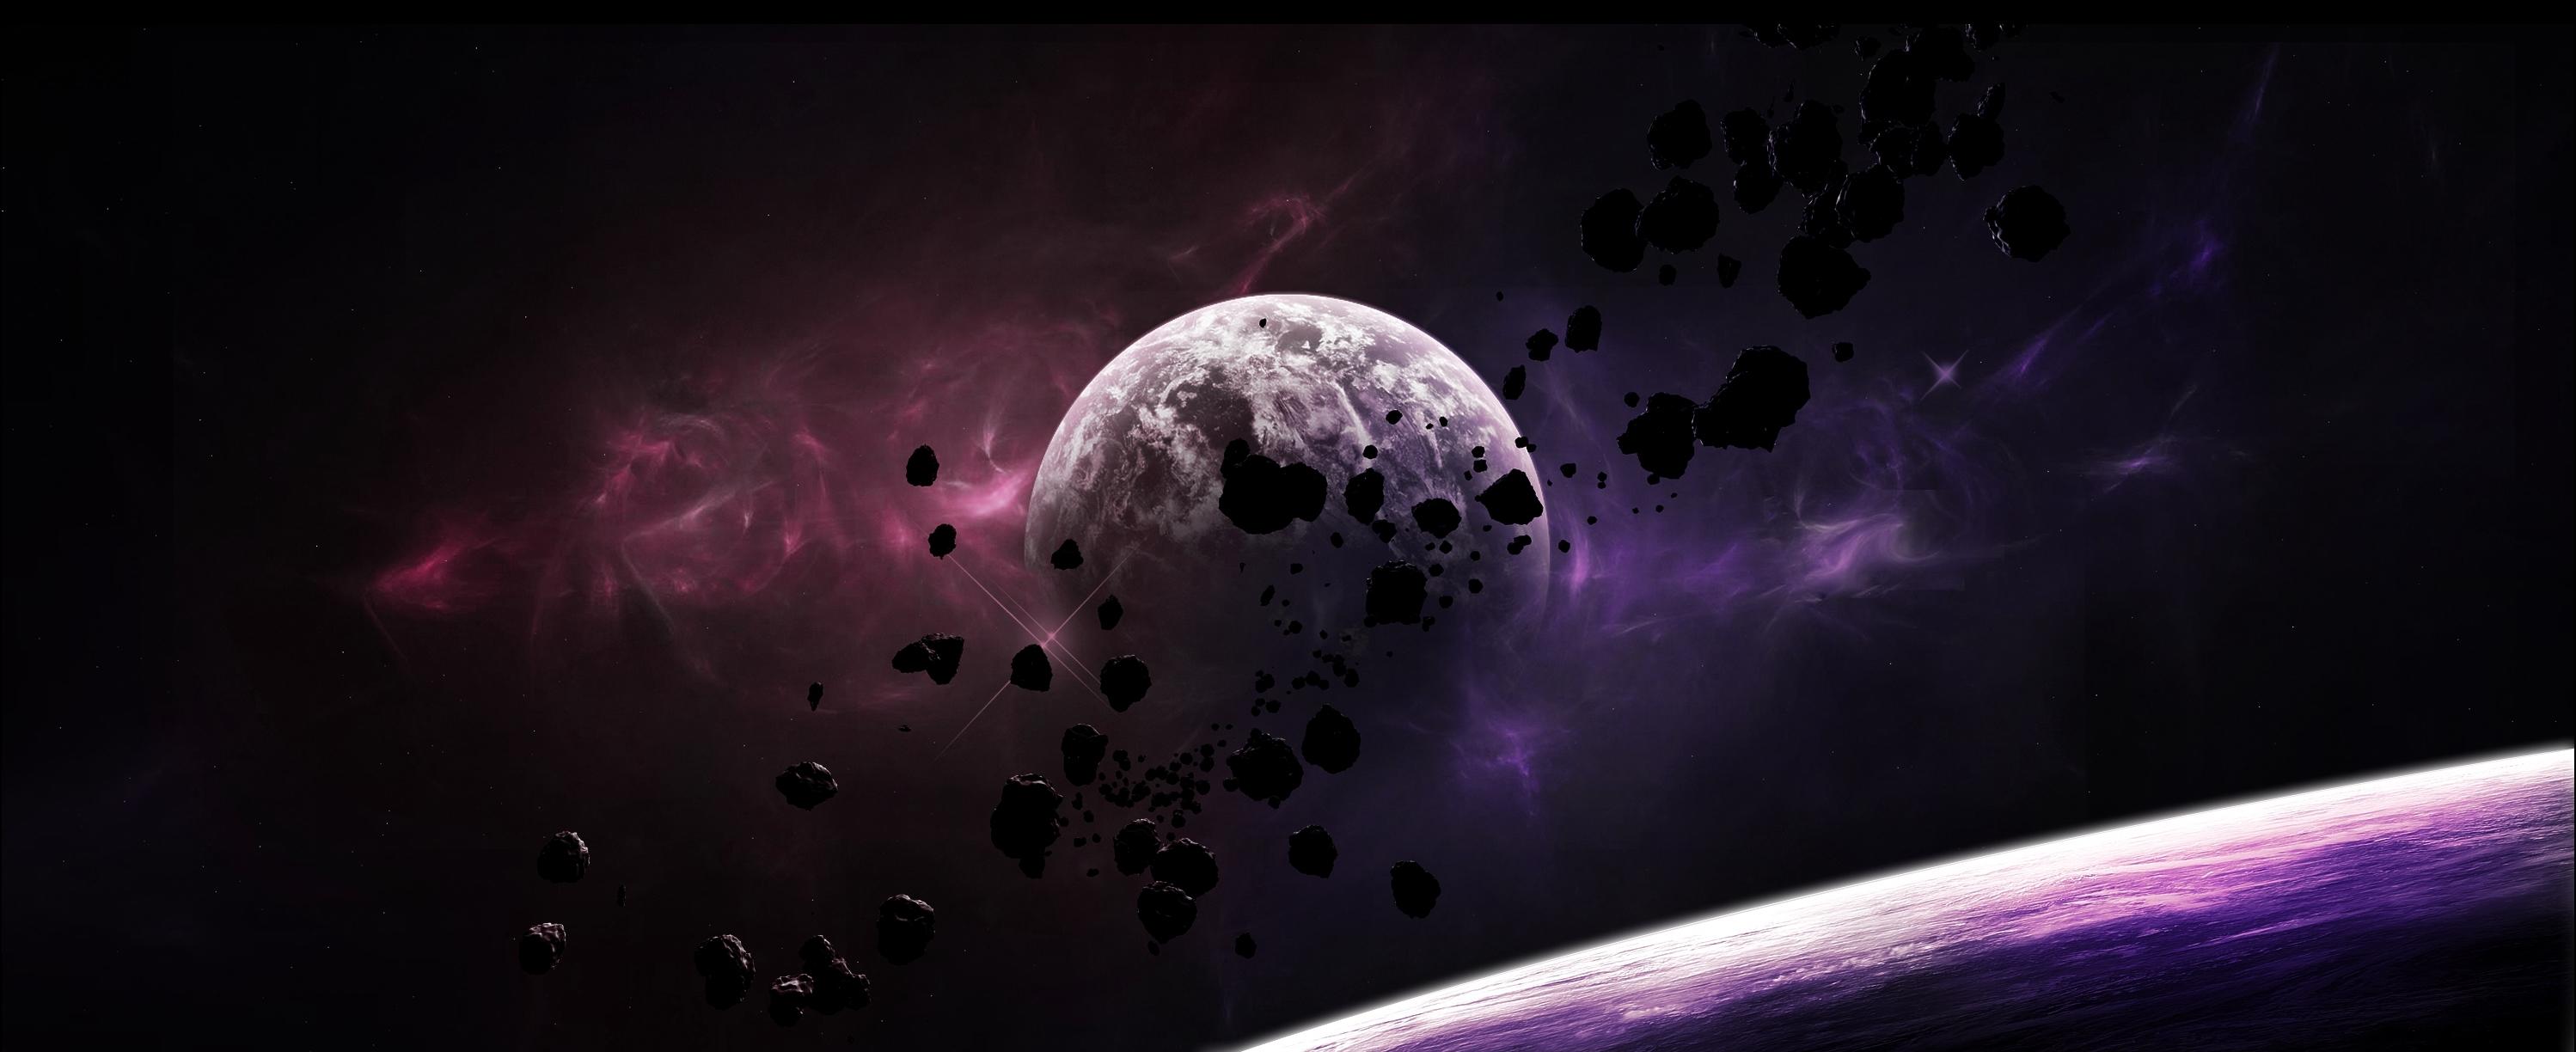 Wallpapers space the universe dark on the desktop